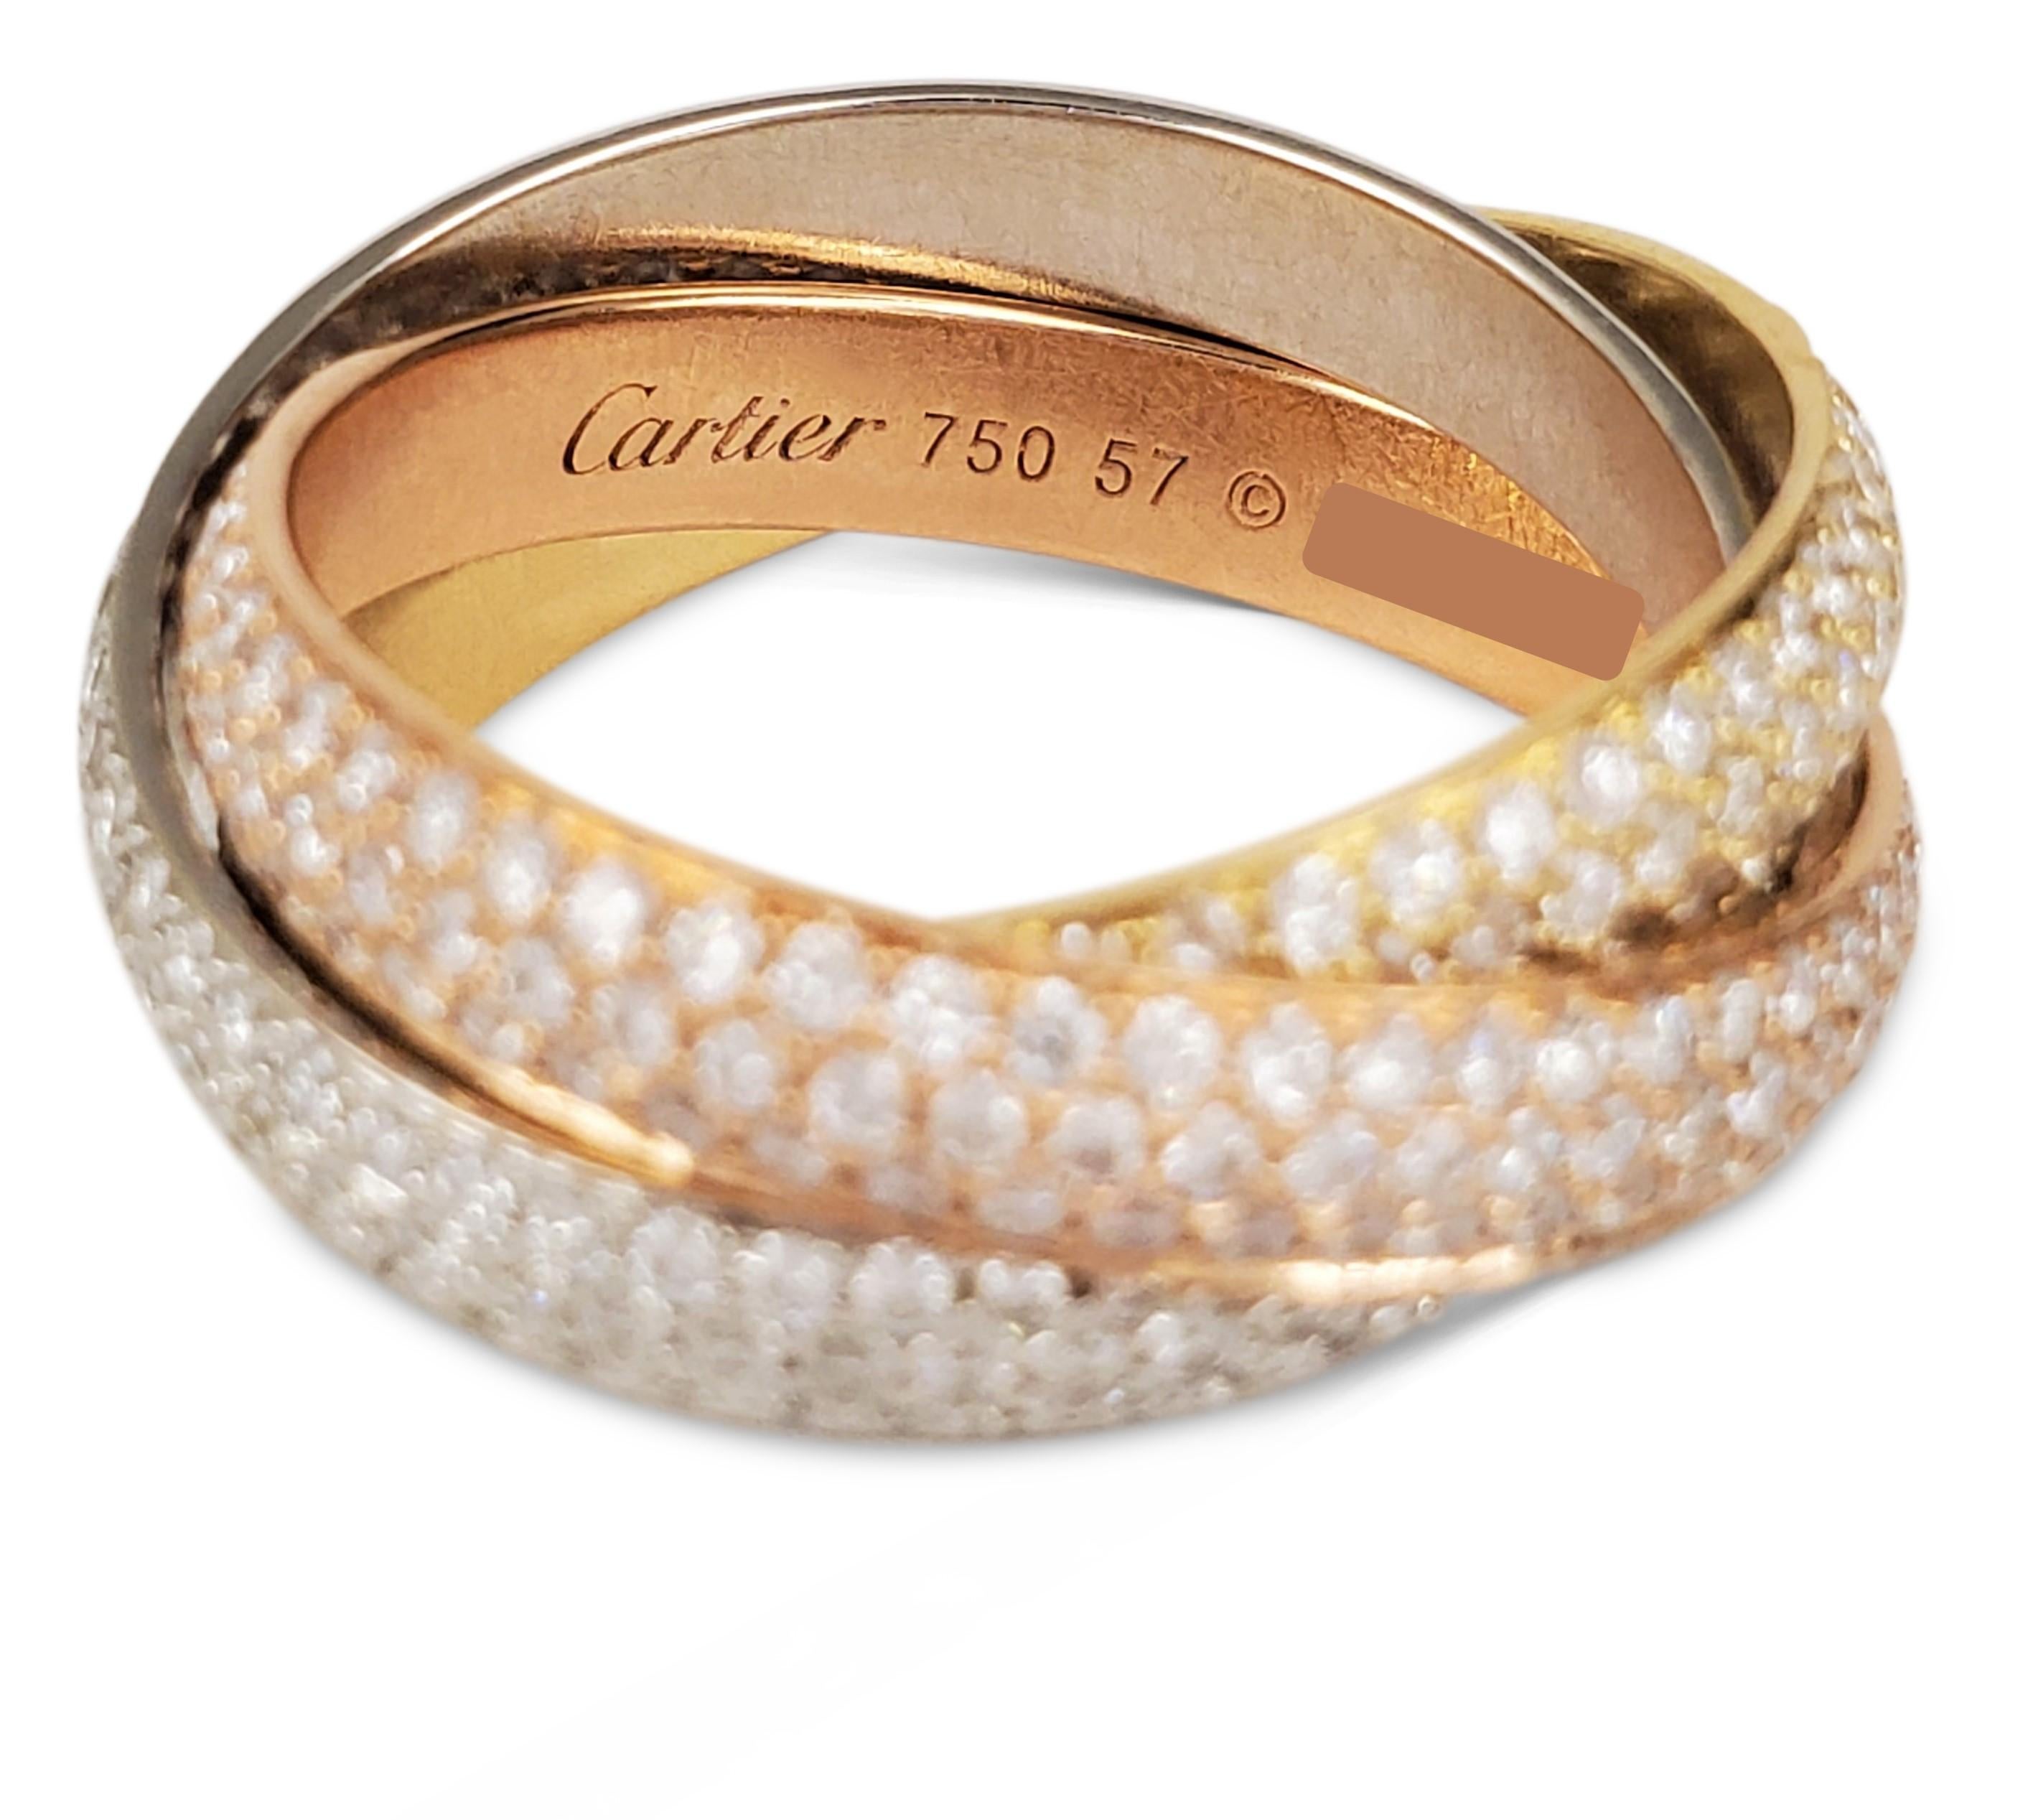 Authentic Cartier 'Trinity' ring comprised of three interlocking mobile bands of 18 karat yellow, rose, and white gold. Each ring is encrusted with pave set high-quality round brilliant cut diamonds of an estimated 2.98 carats. Signed Cartier, 750,